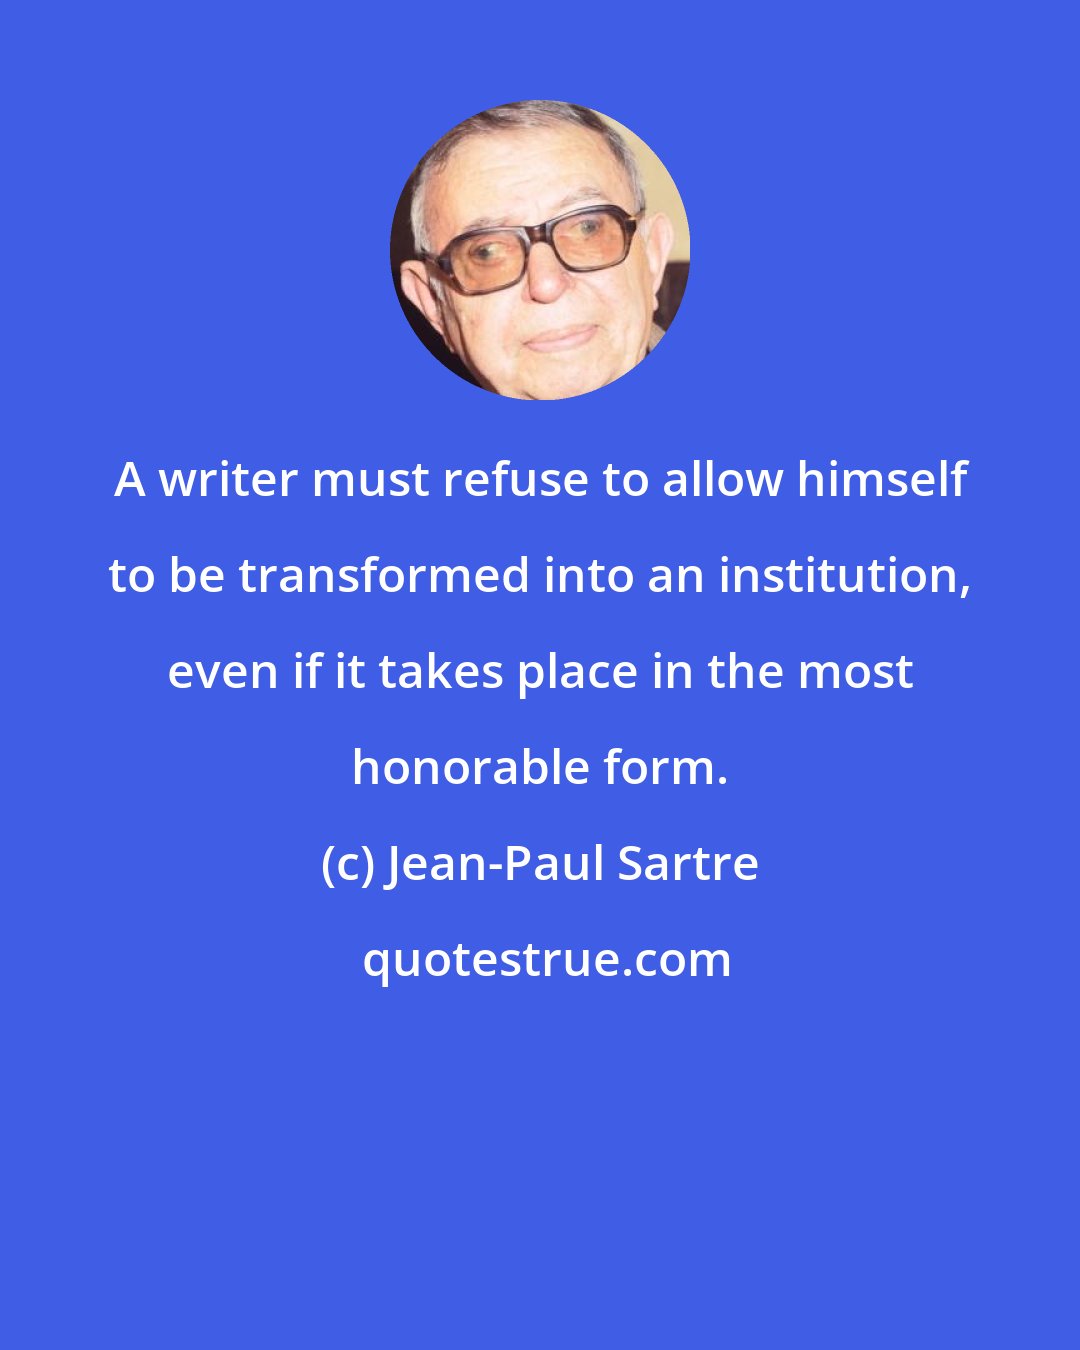 Jean-Paul Sartre: A writer must refuse to allow himself to be transformed into an institution, even if it takes place in the most honorable form.